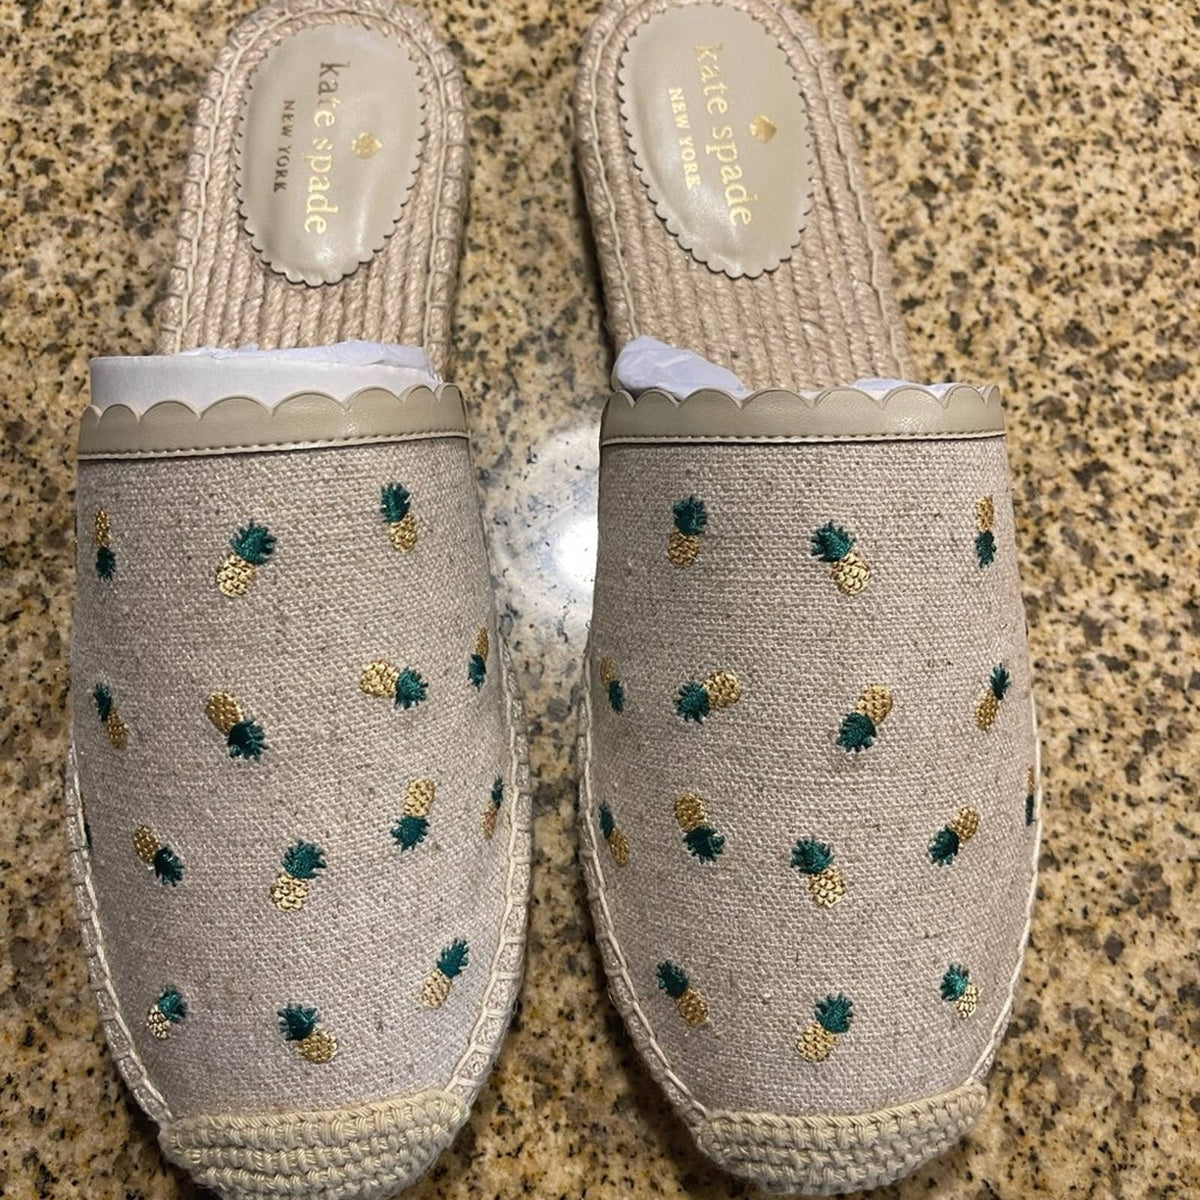 kate spade Rosie Embroidered
Pineapple Flat Mules Slide